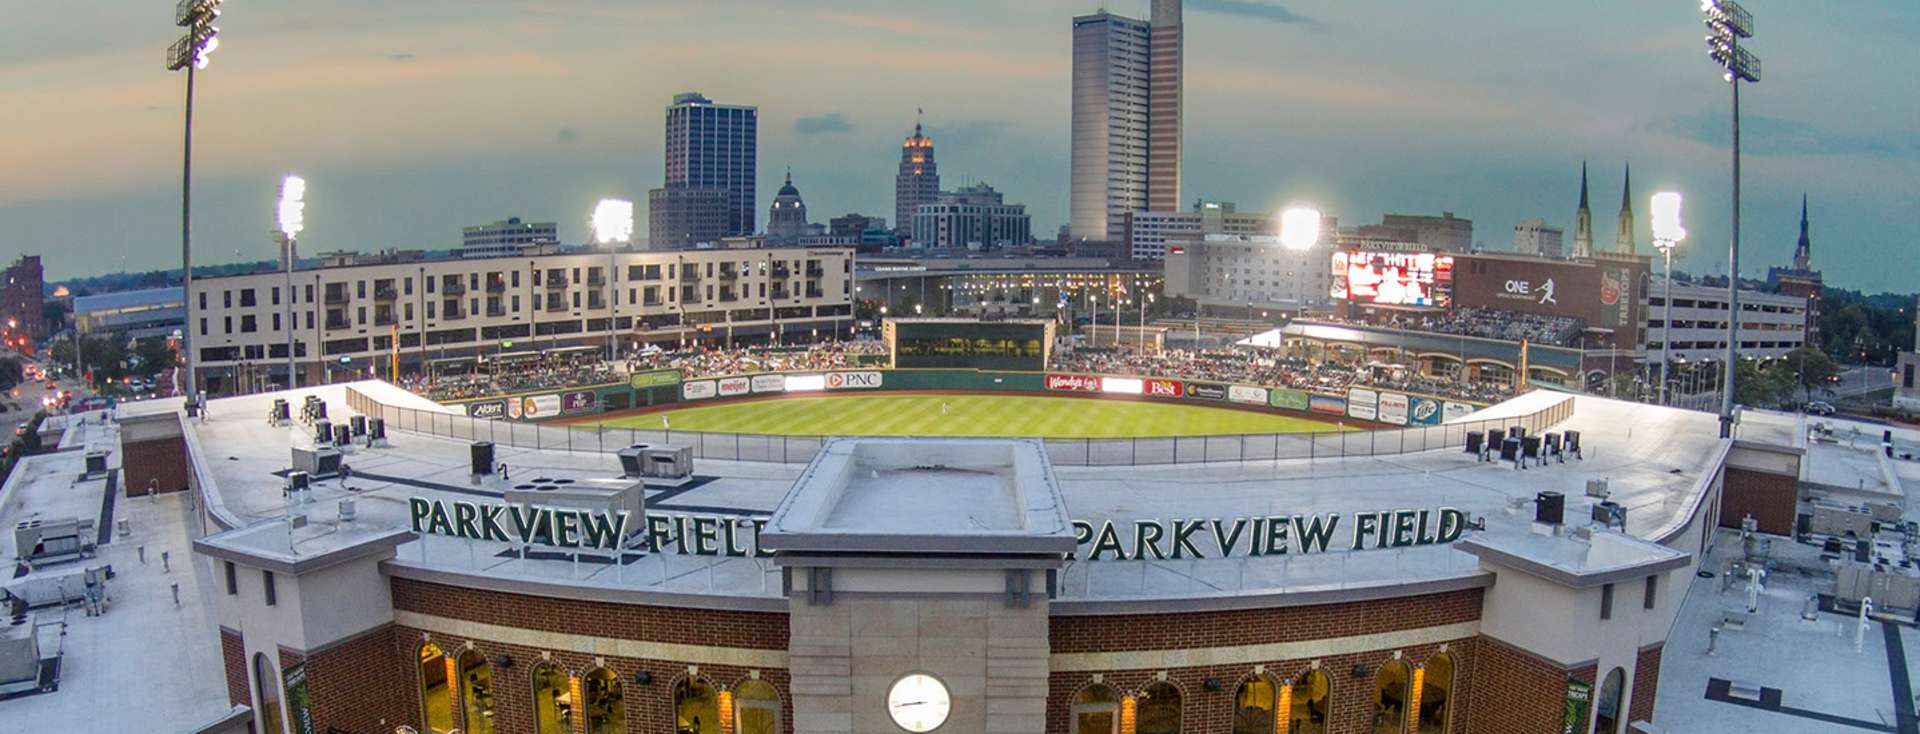 Image result for parkview field